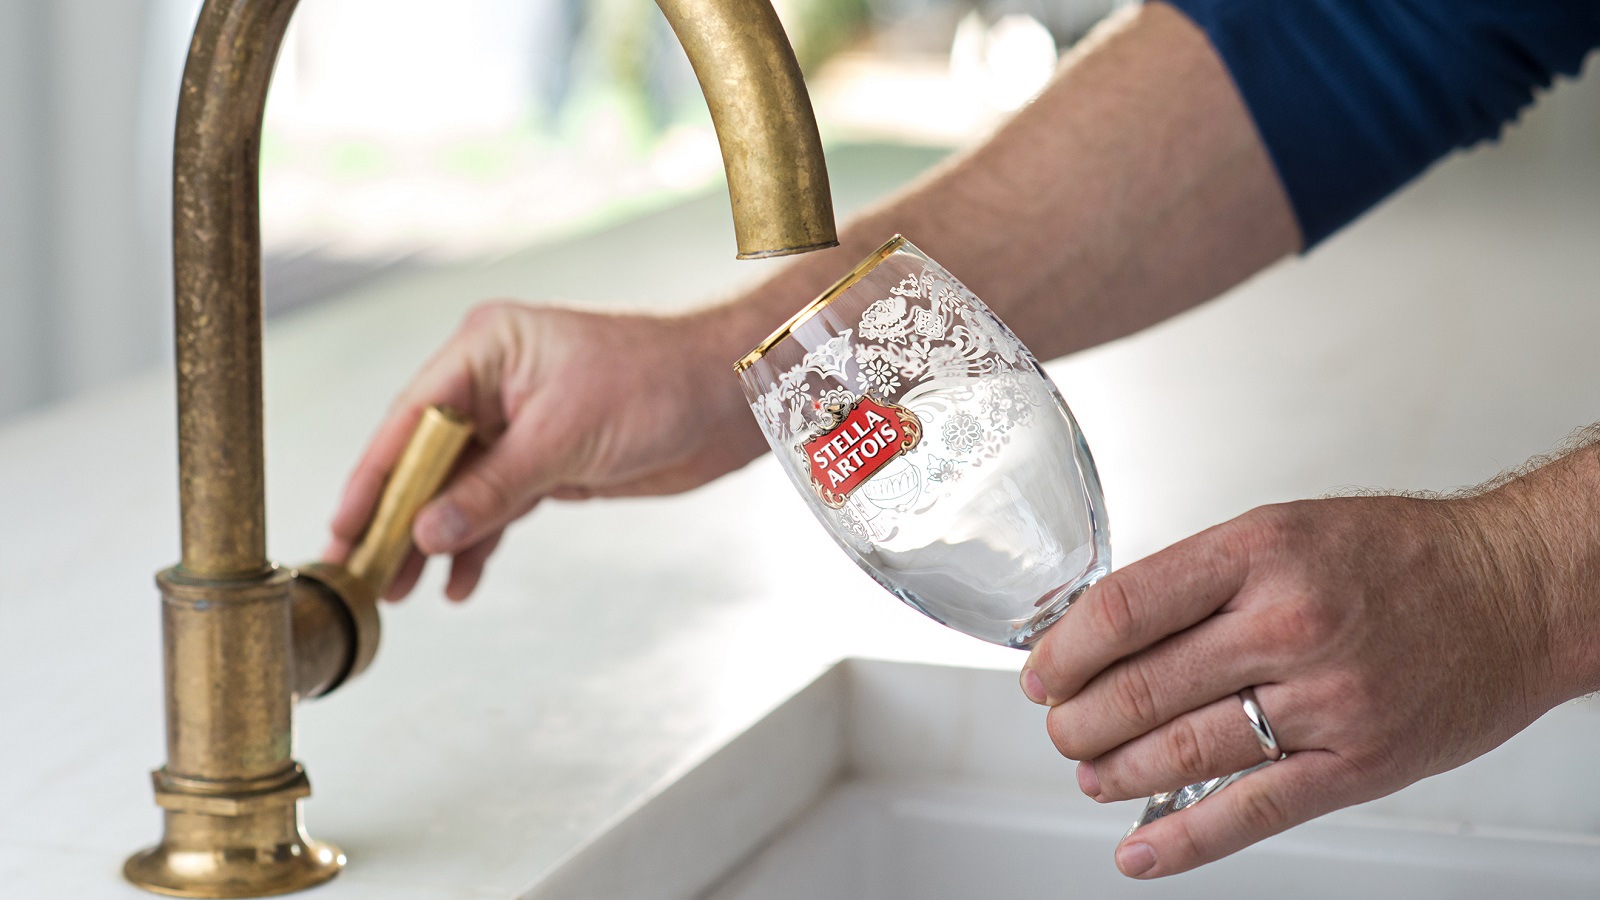 Stella’s Way to Solve Water Crisis Is in the Hands of Consumers